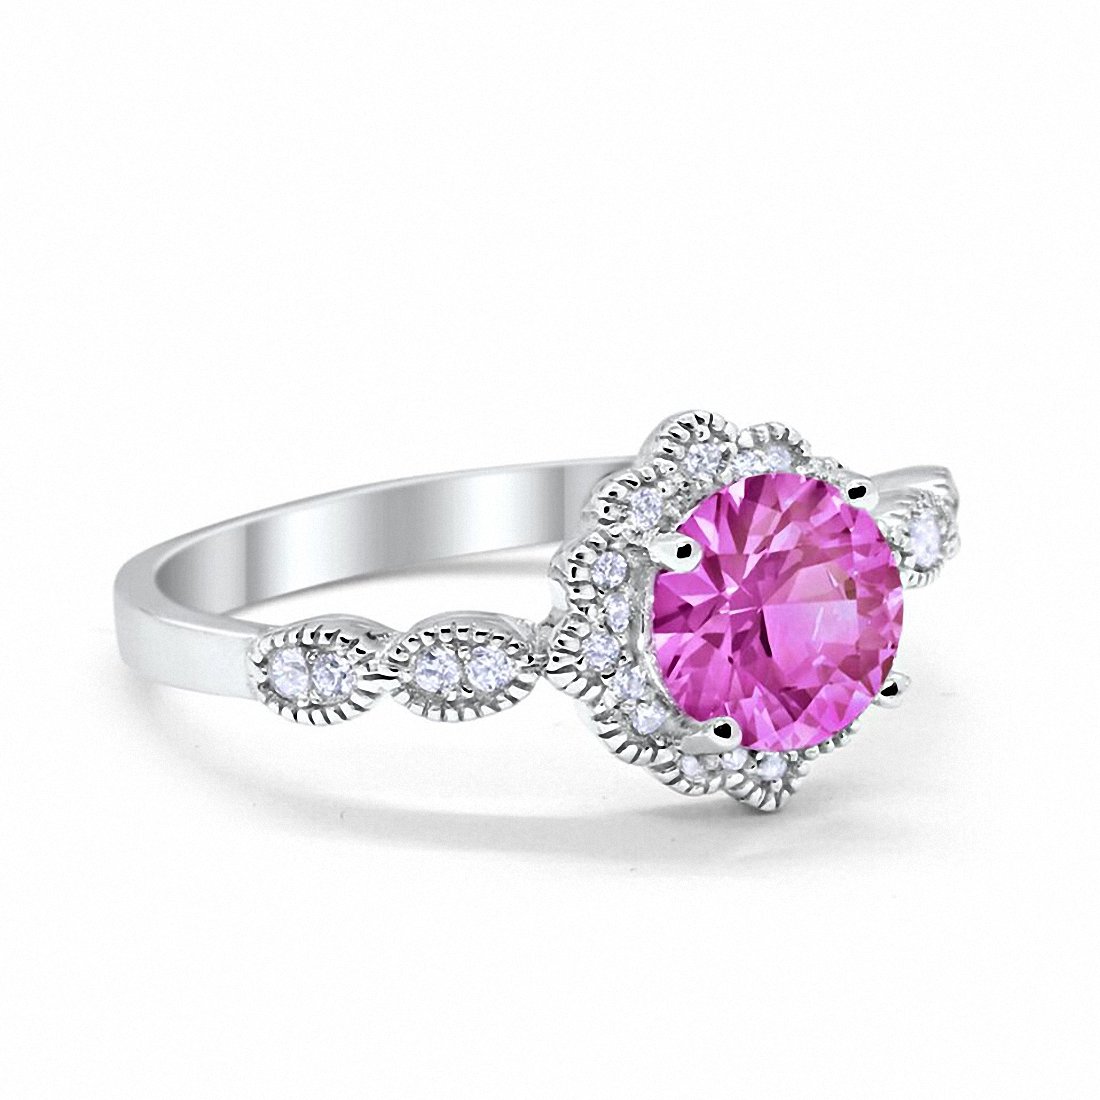 Floral Art Engagement Ring Simulated Pink Cubic Zirconia 925 Sterling Silver